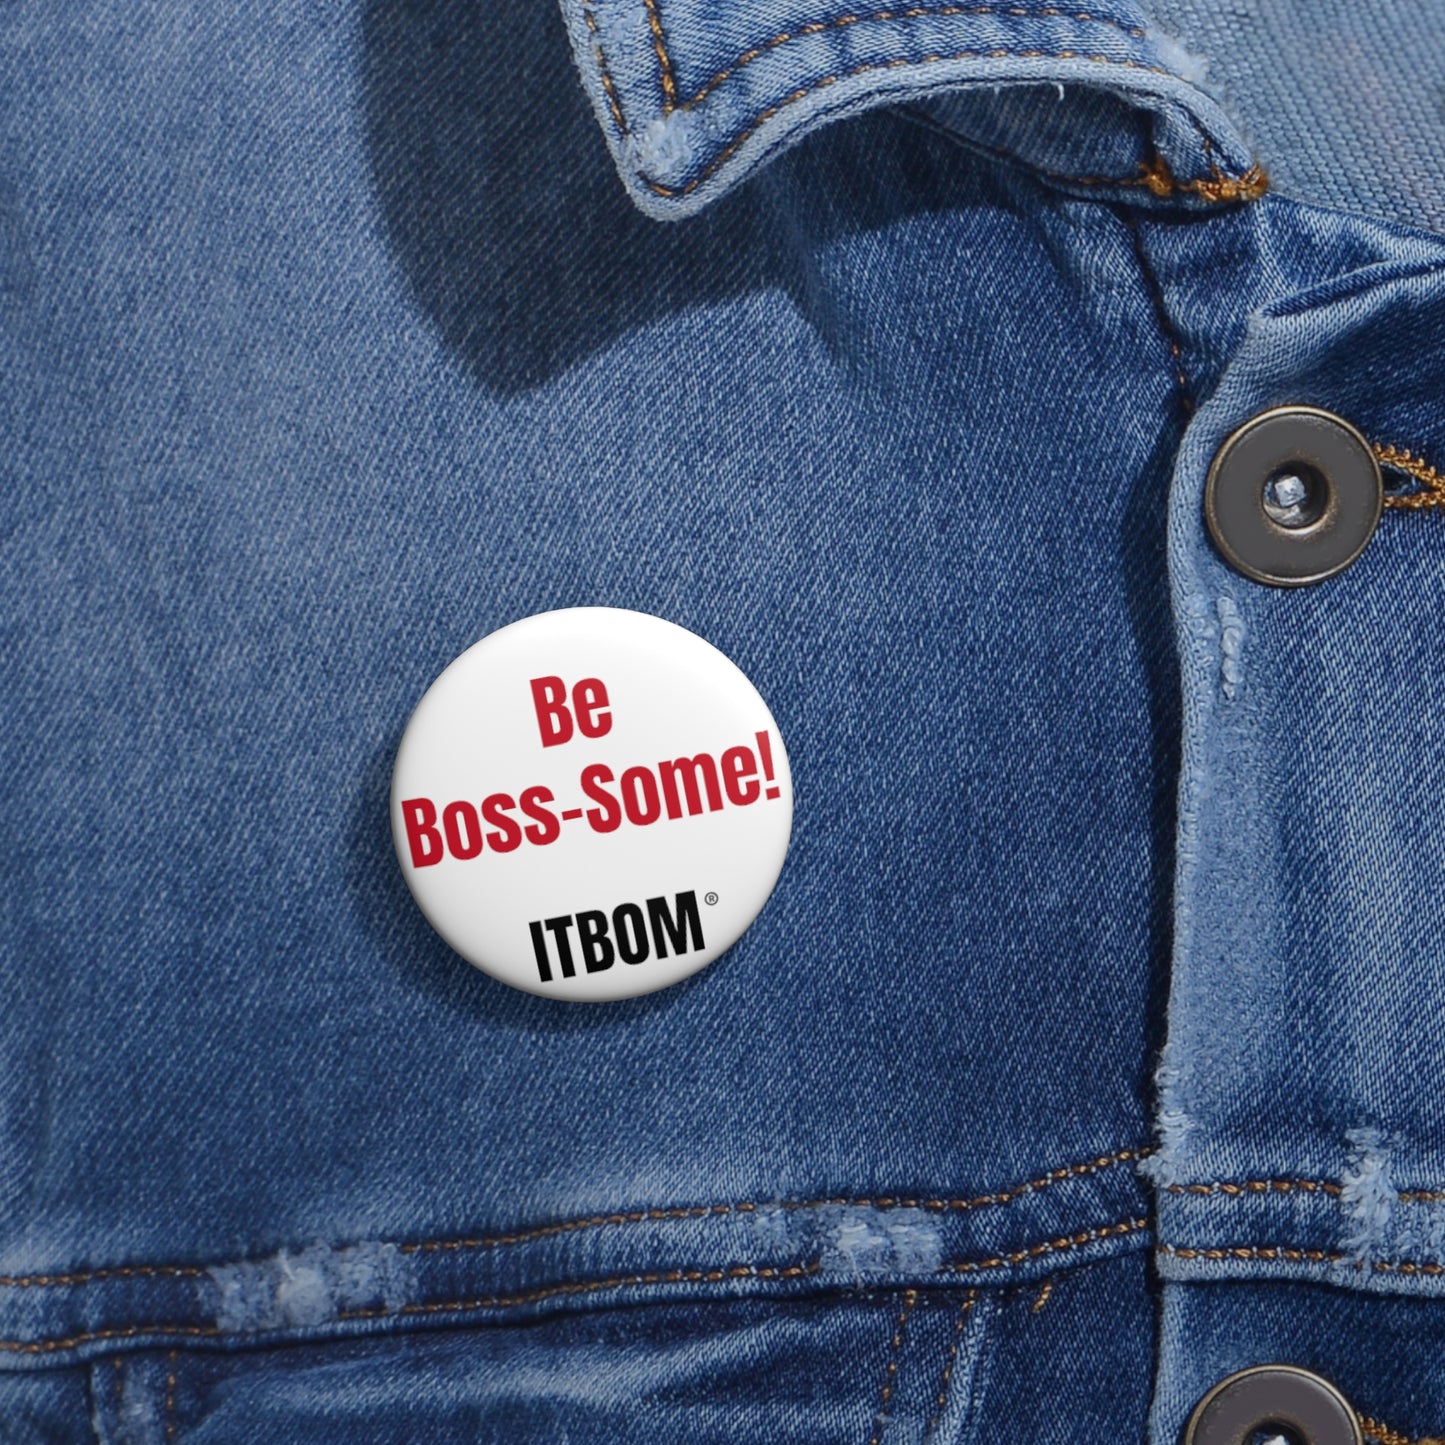 BE BOSS-SOME!!! Custom Pin Buttons